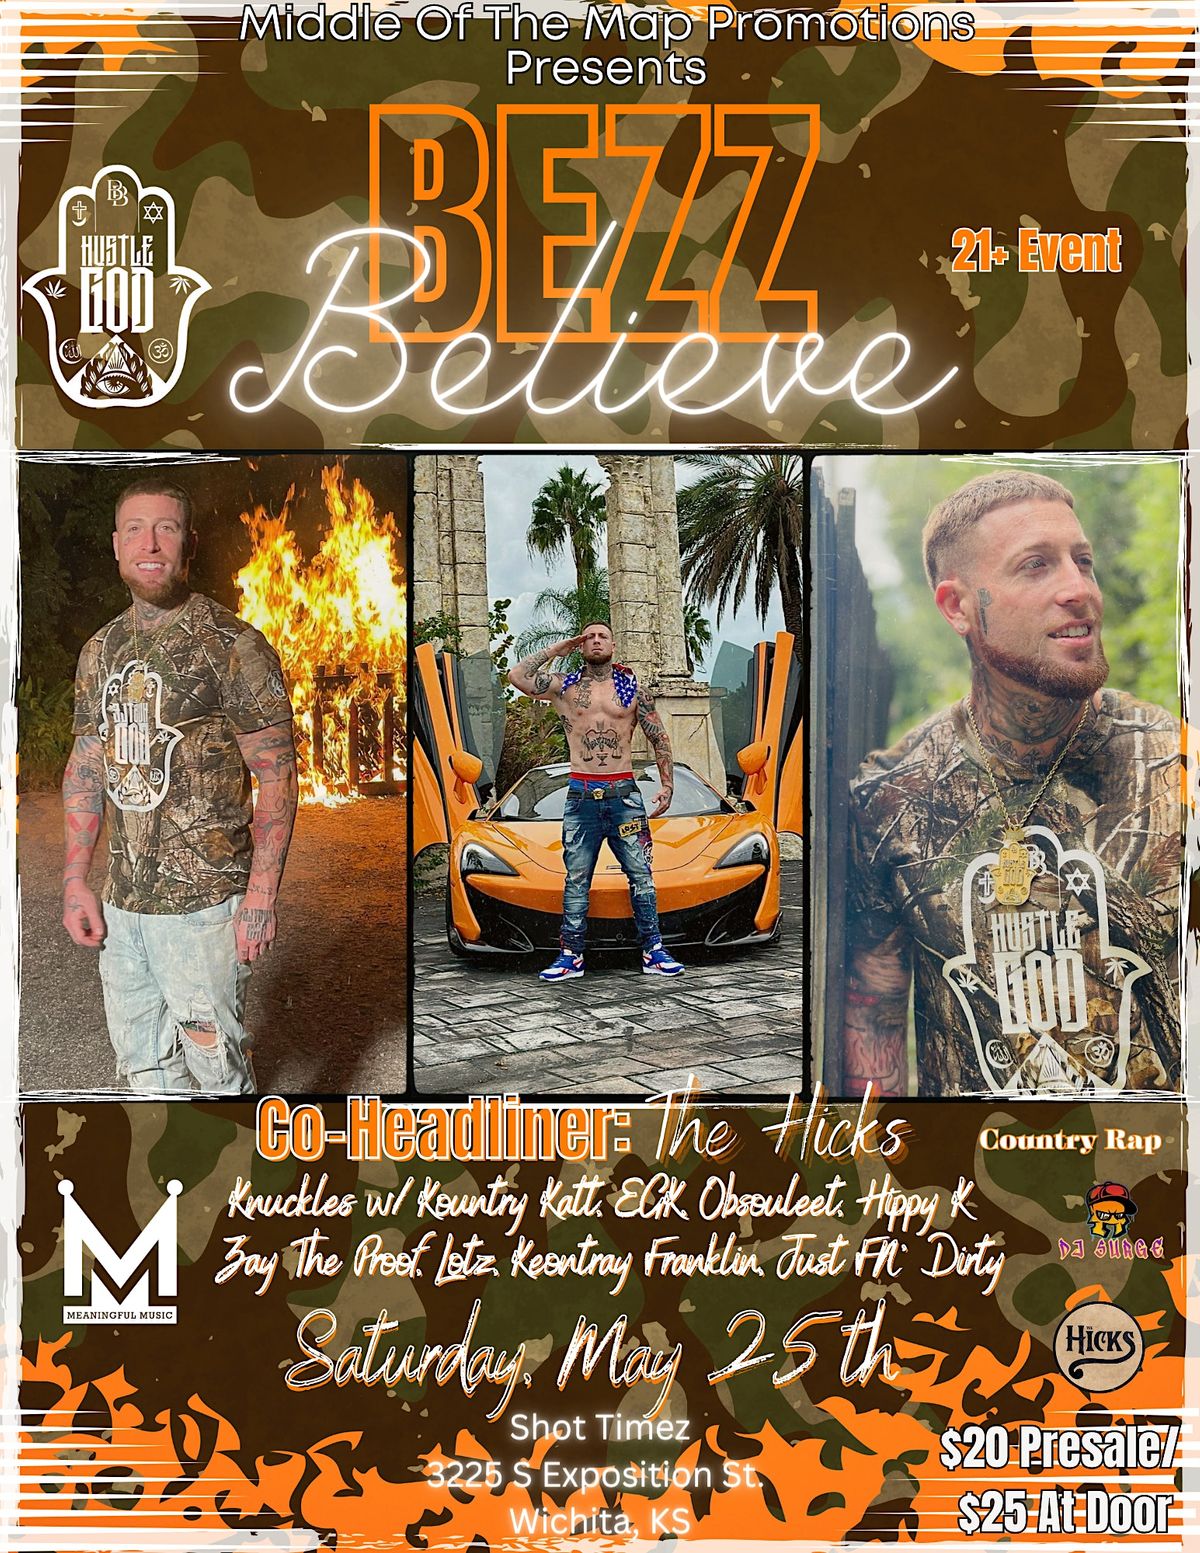 Middle Of The Map Promotions Presents BEZZ BELIEVE